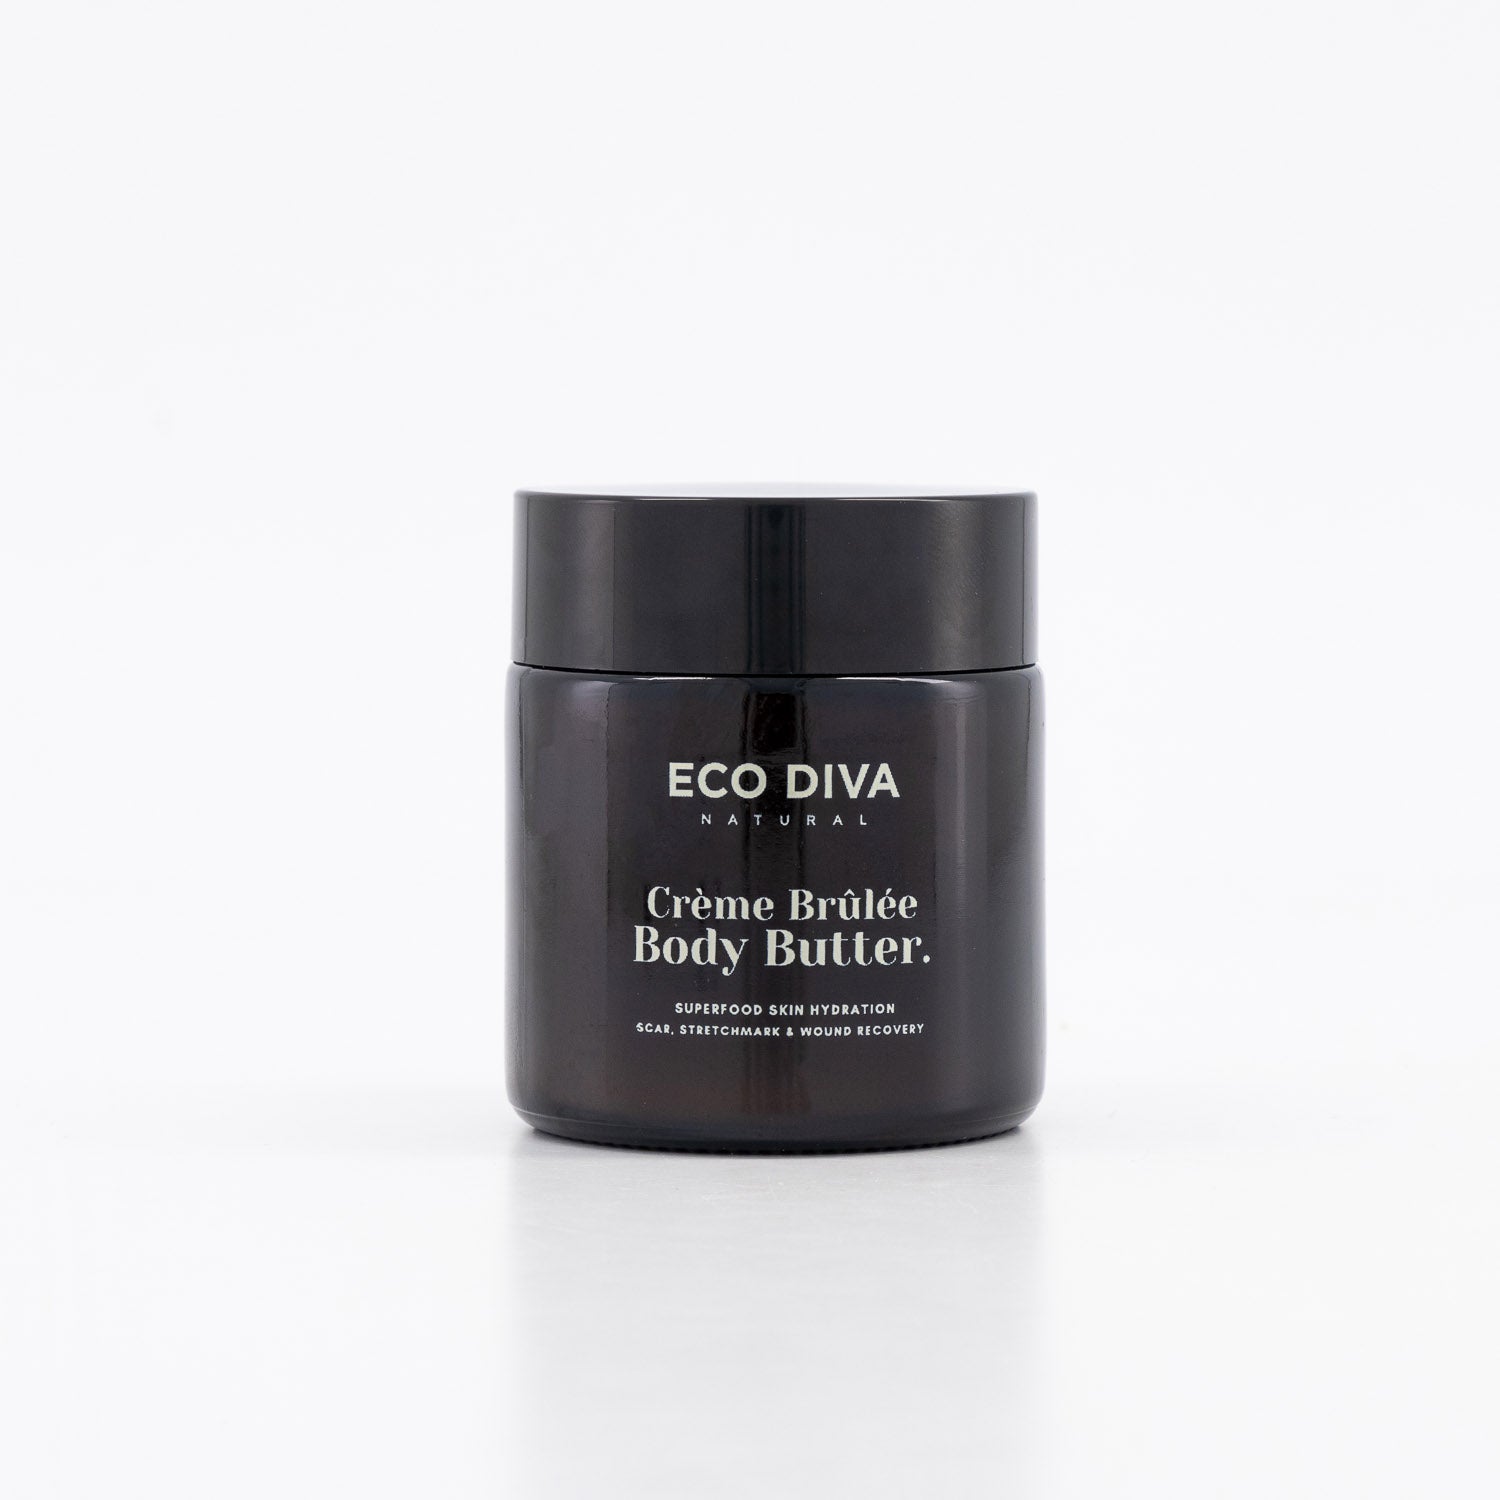 Eco Diva Body Butter - The Creme Brulee 100g